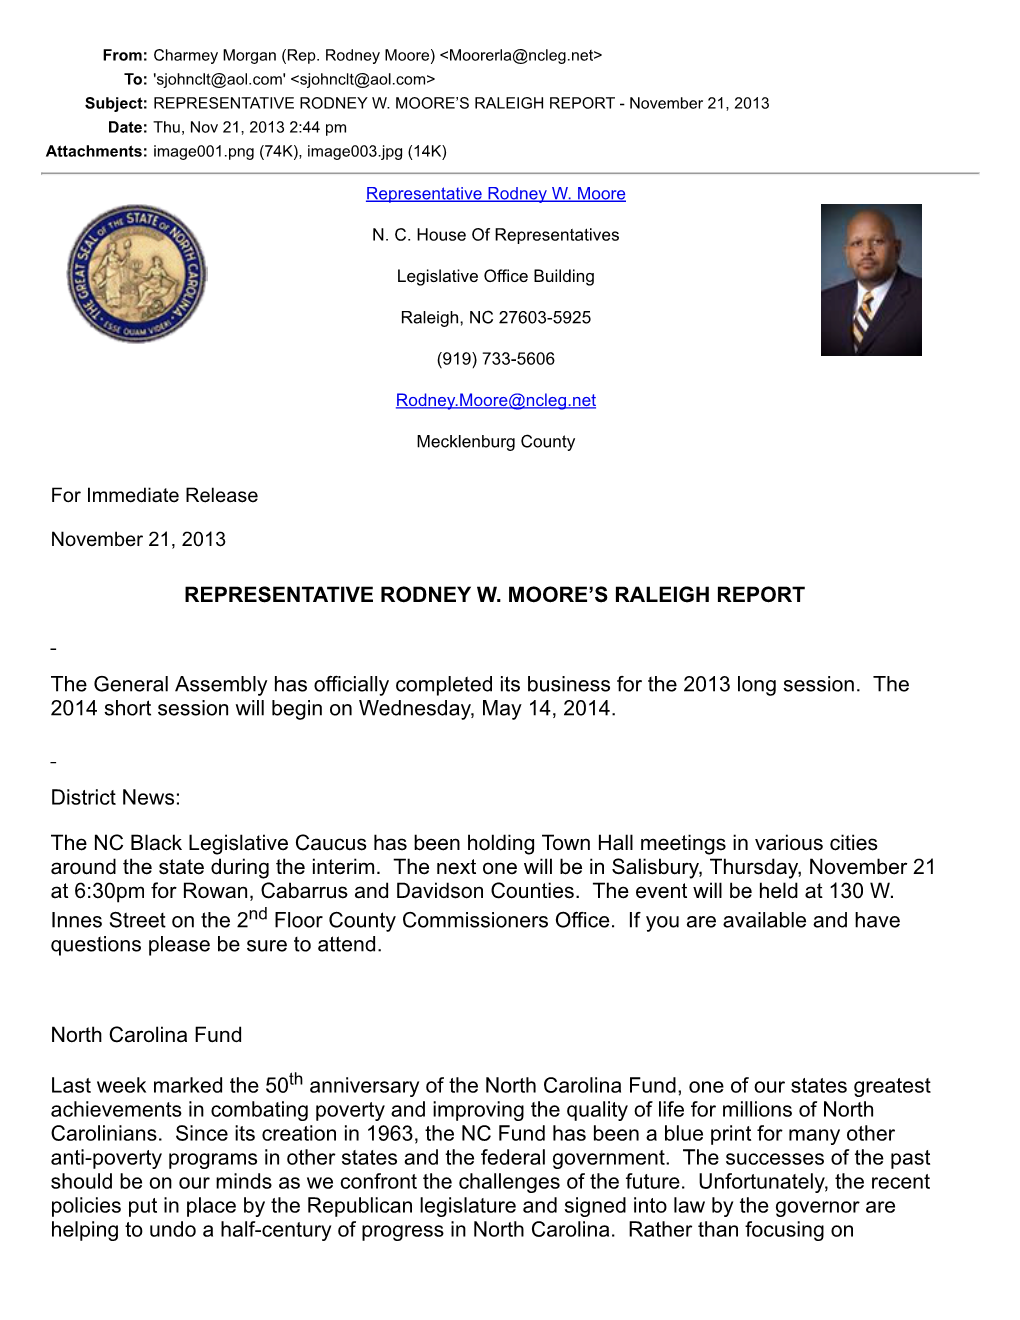 REPRESENTATIVE RODNEY W. MOORE's RALEIGH REPORT The